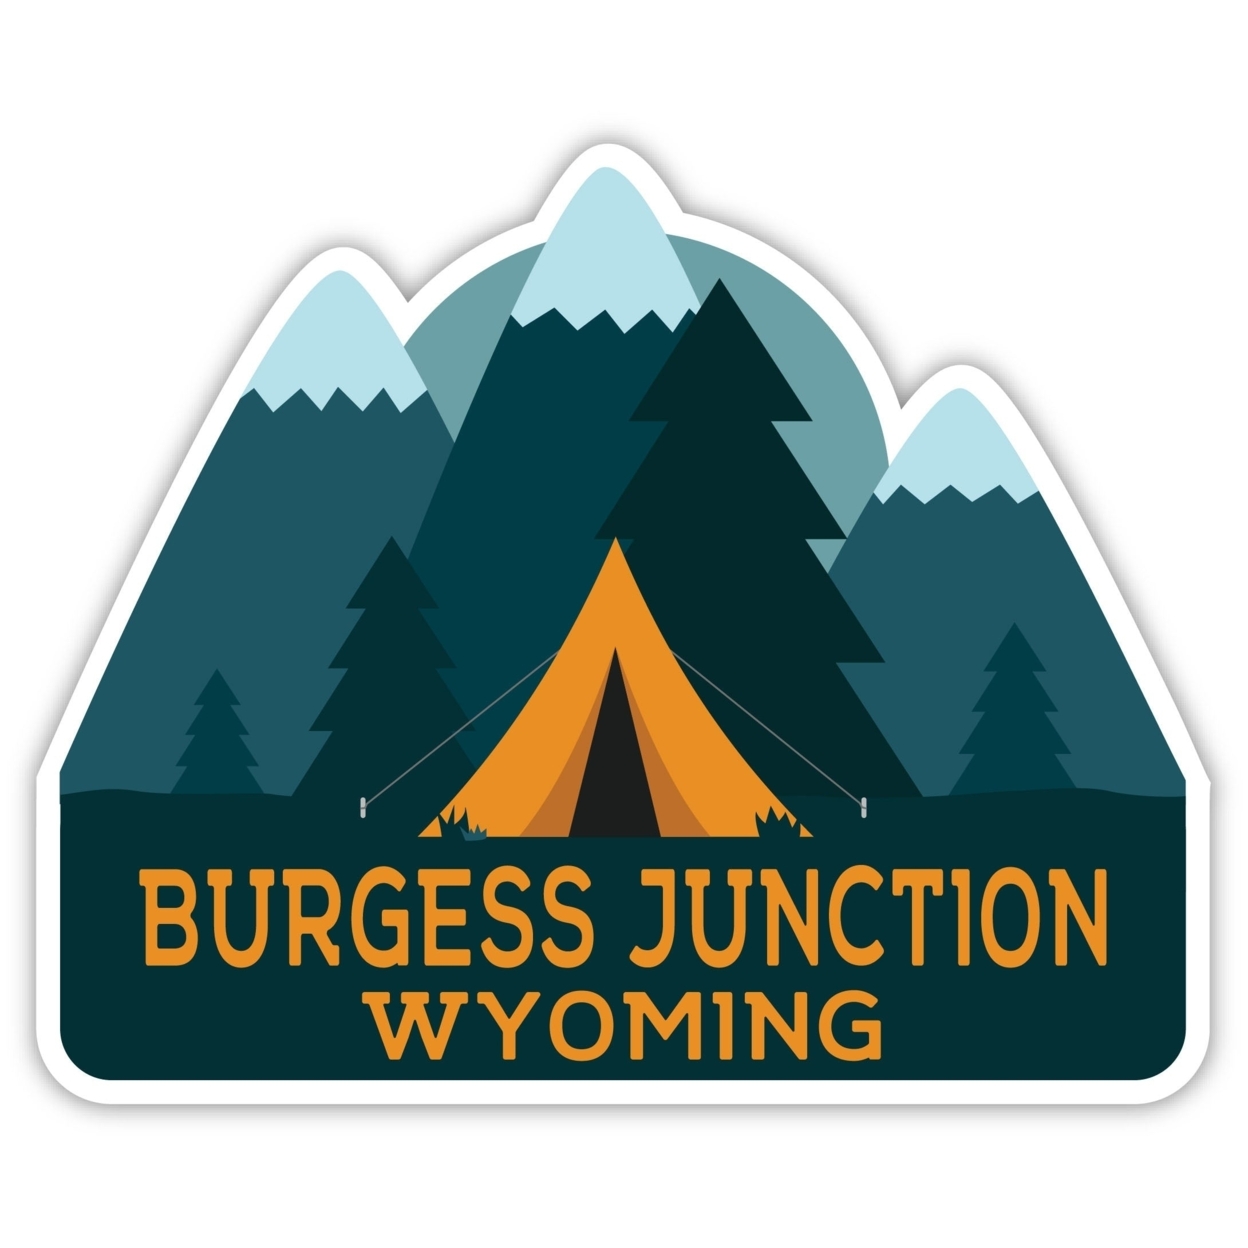 Burgess Junction Wyoming Souvenir Decorative Stickers (Choose Theme And Size) - 4-Pack, 10-Inch, Tent